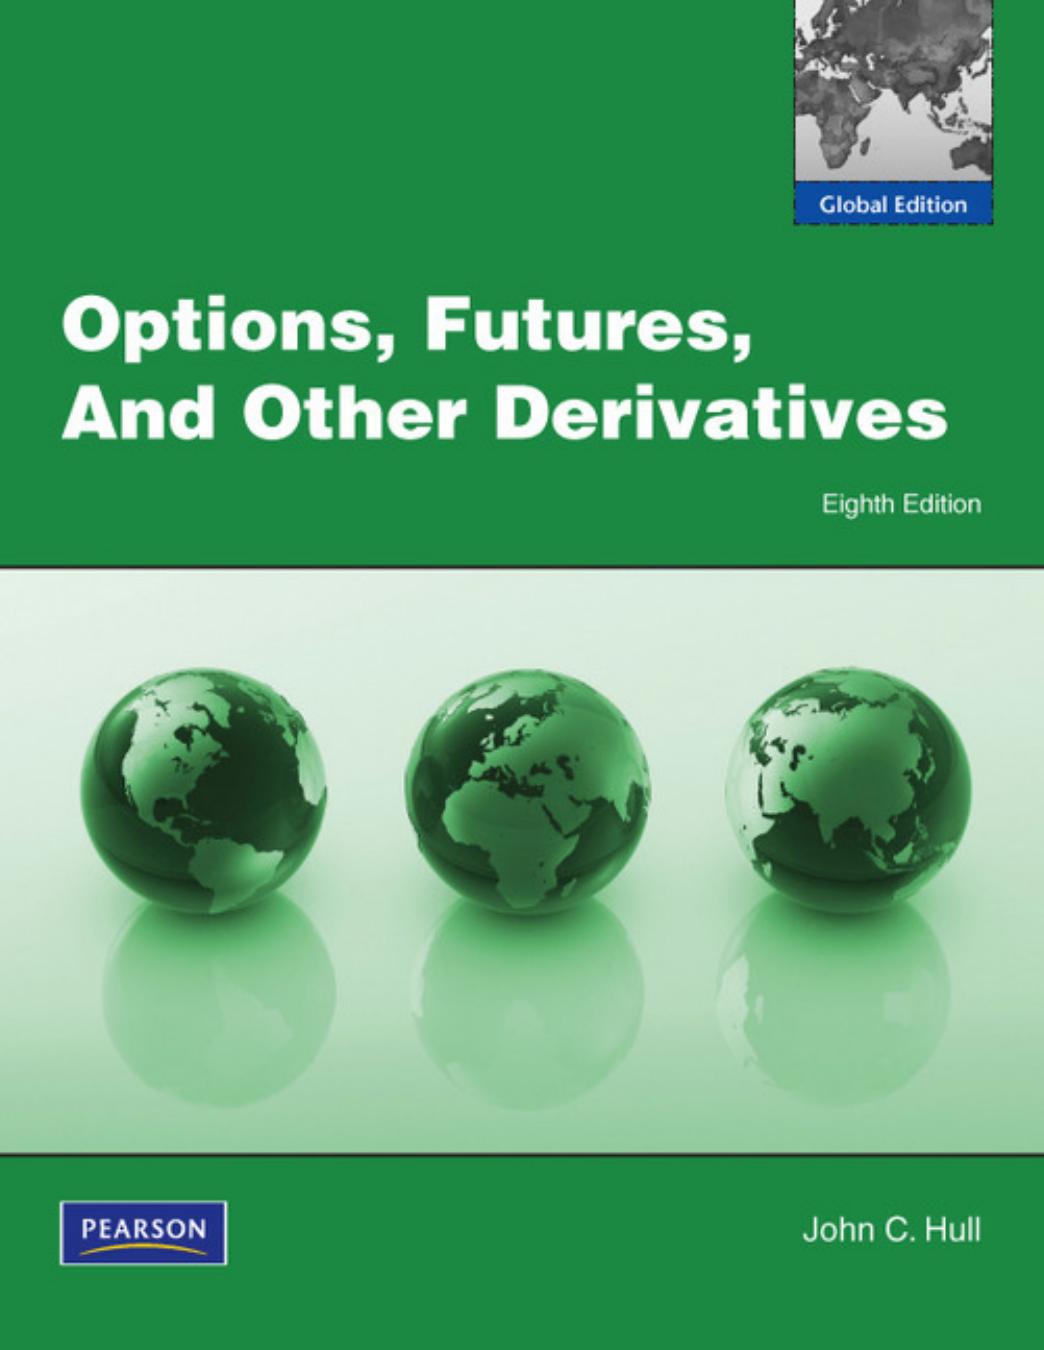 pdf hull options futures and other derivatives 7th edition